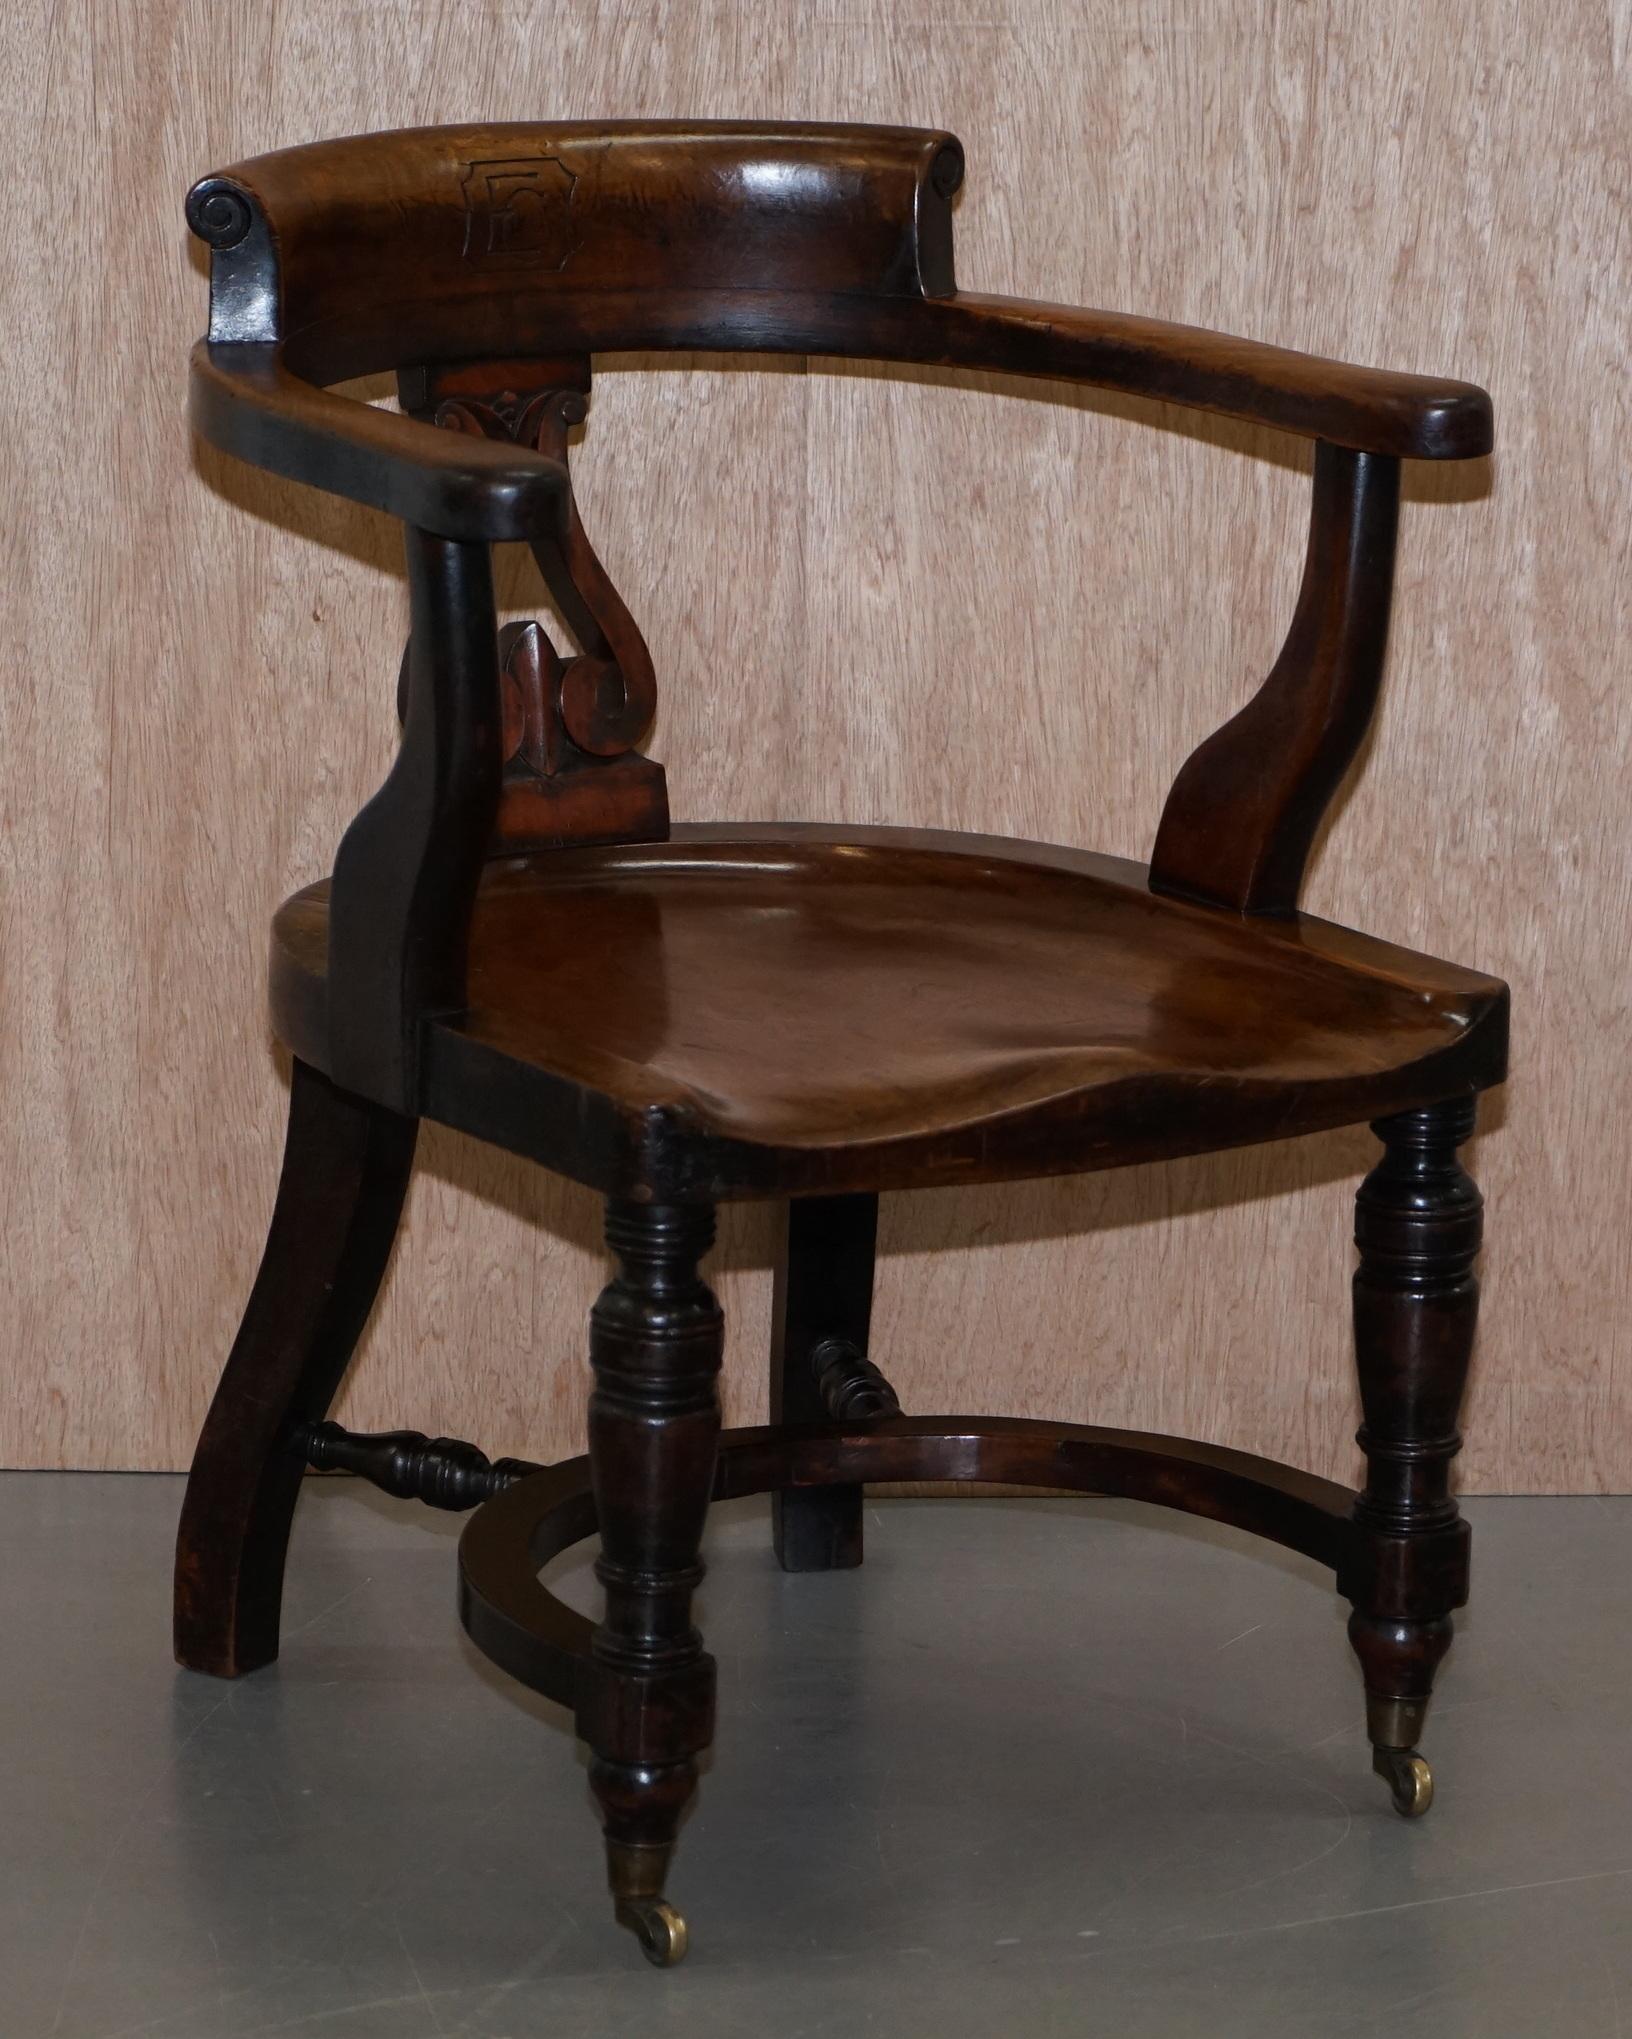 We are delighted to offer for sale this stunning and important suite of six original Victorian Walnut Eton College captains chairs each one carved with EC in the back rest

A substantial find, I have never seen one of these let alone a suite of